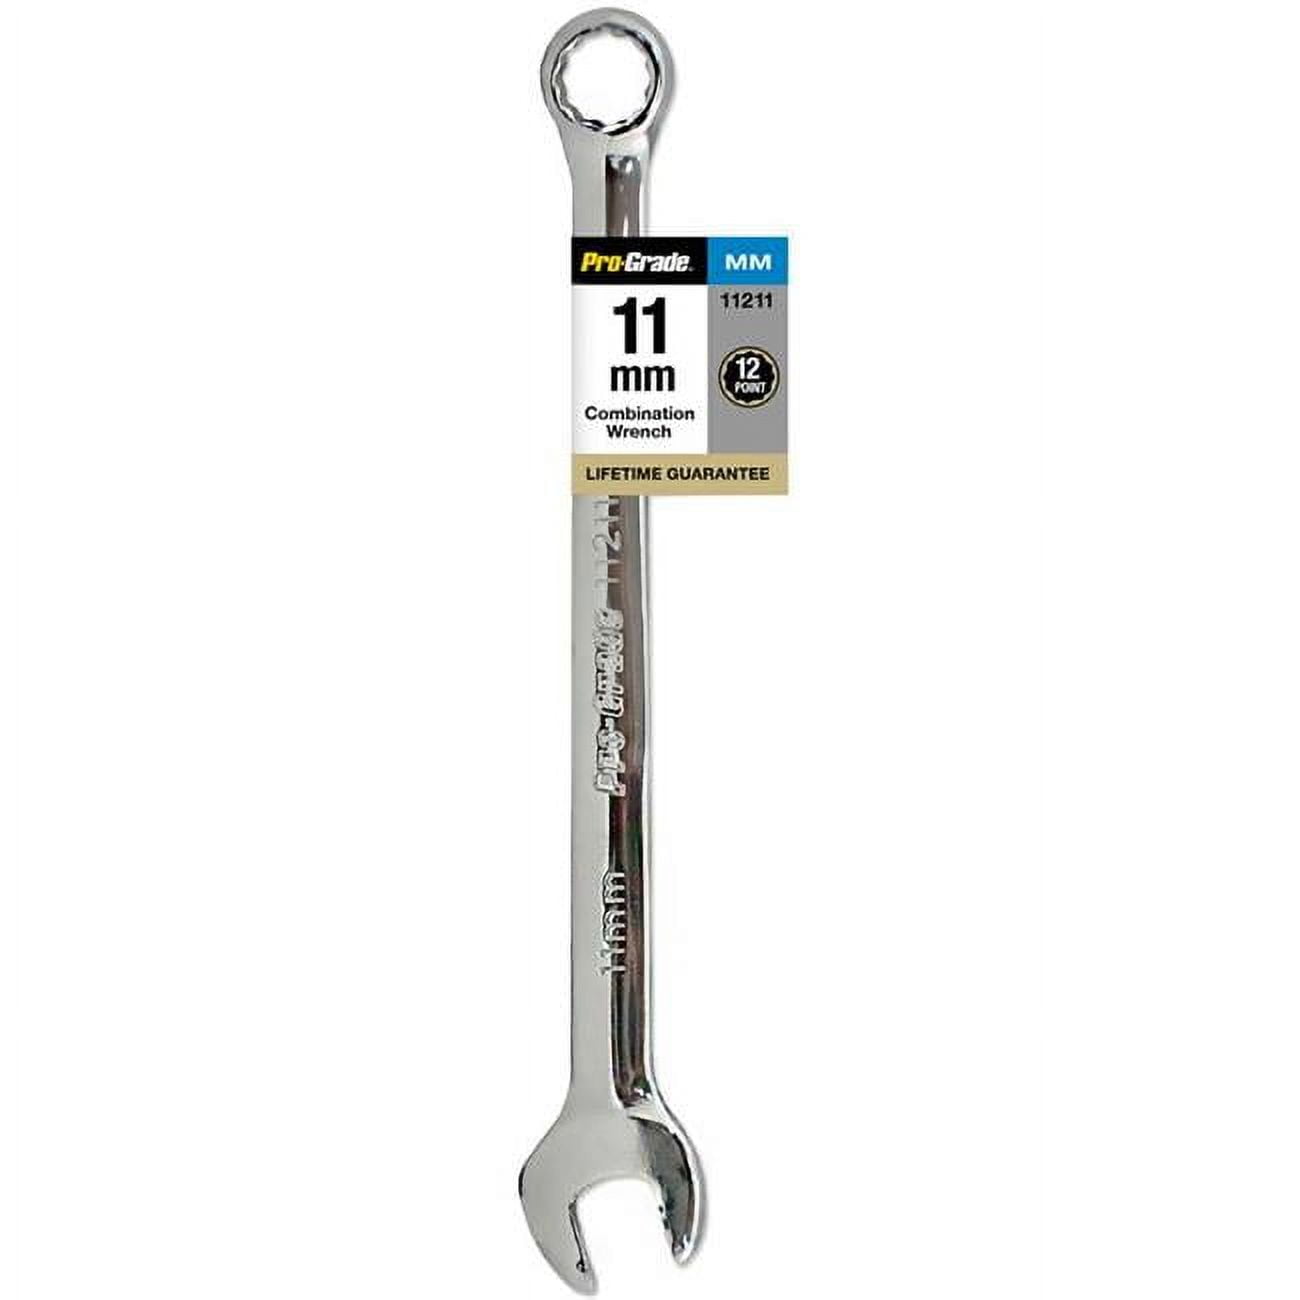 Picture of Pro-Grade 11211 11 mm Combination Wrench